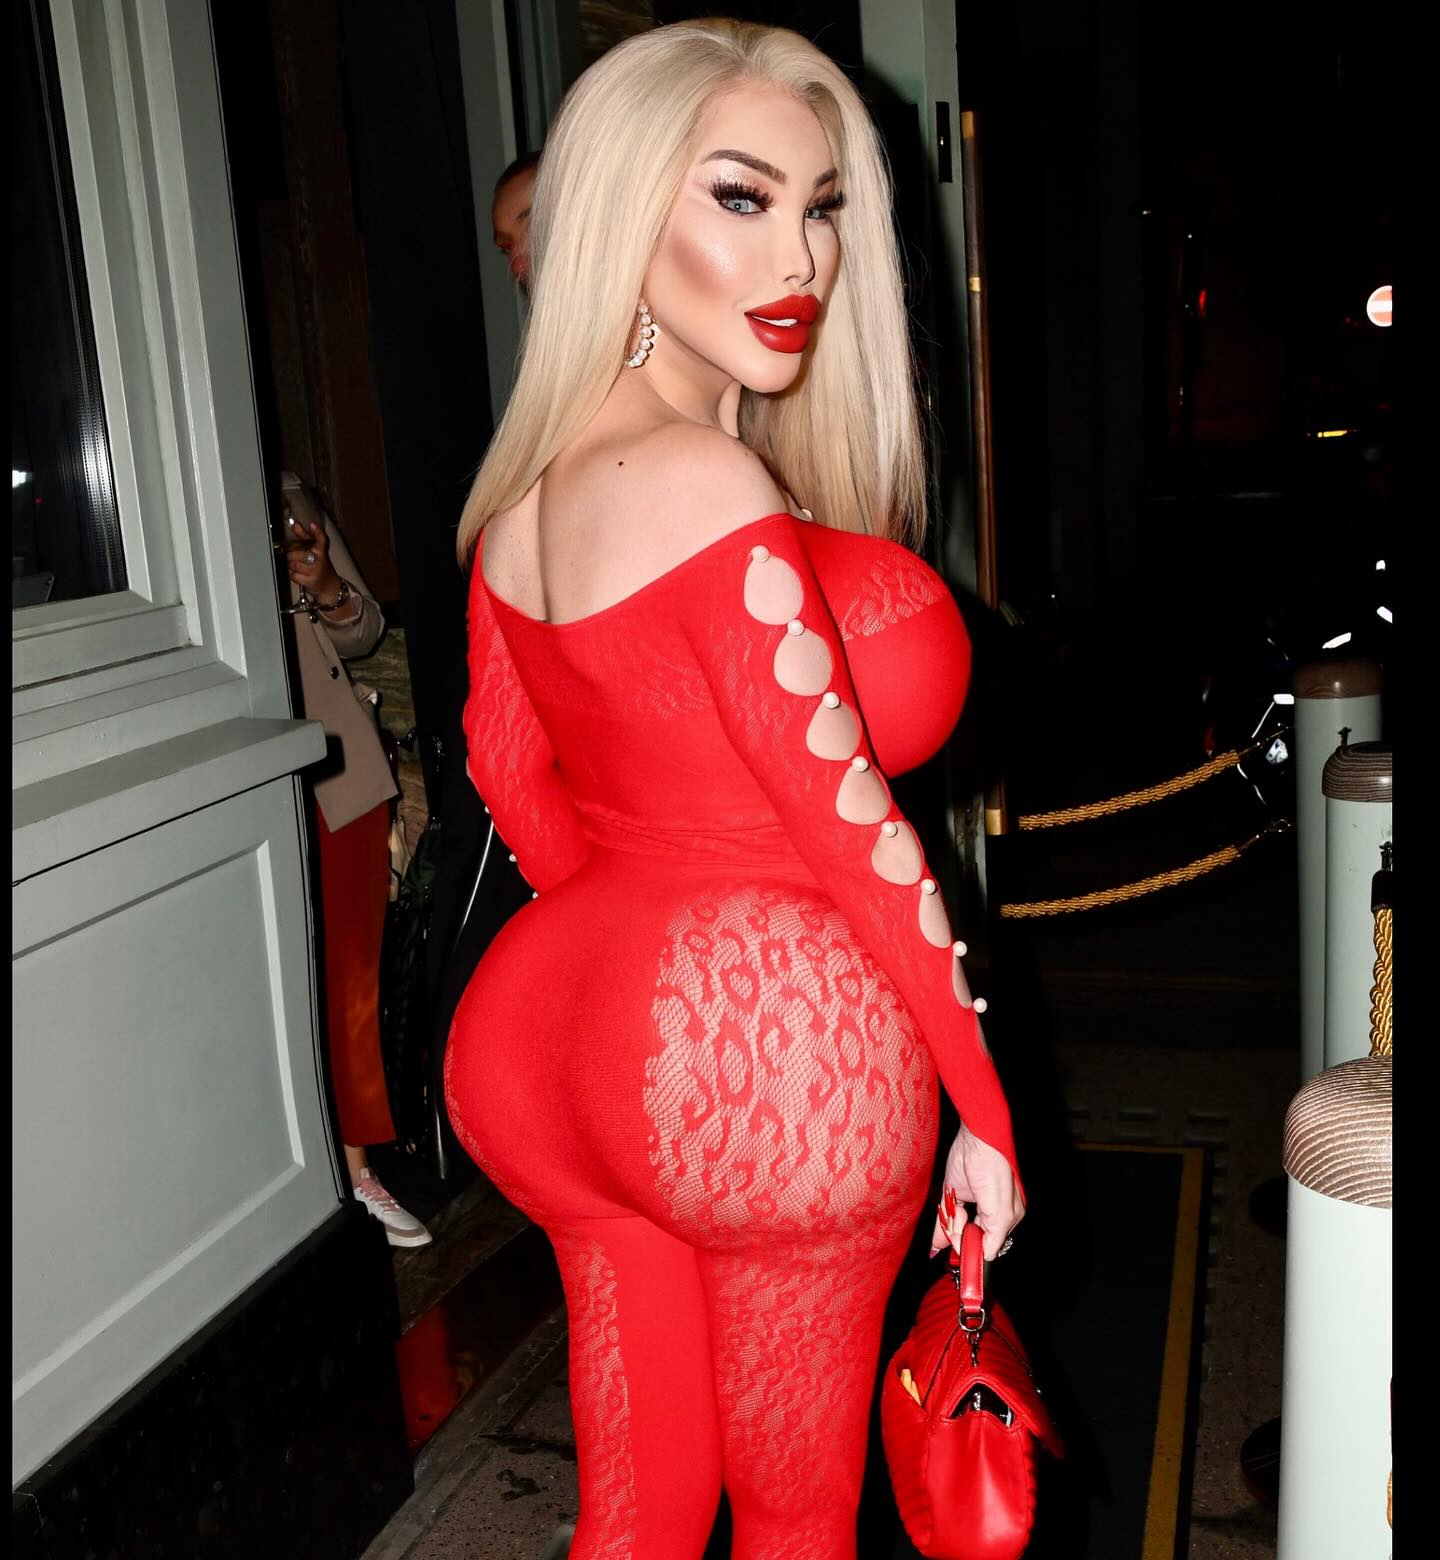 In a world full of ordinary, dare to wear red by @FashionNova #FashionNova #NovaBabe 

#jessicaalves in #london #mayfair